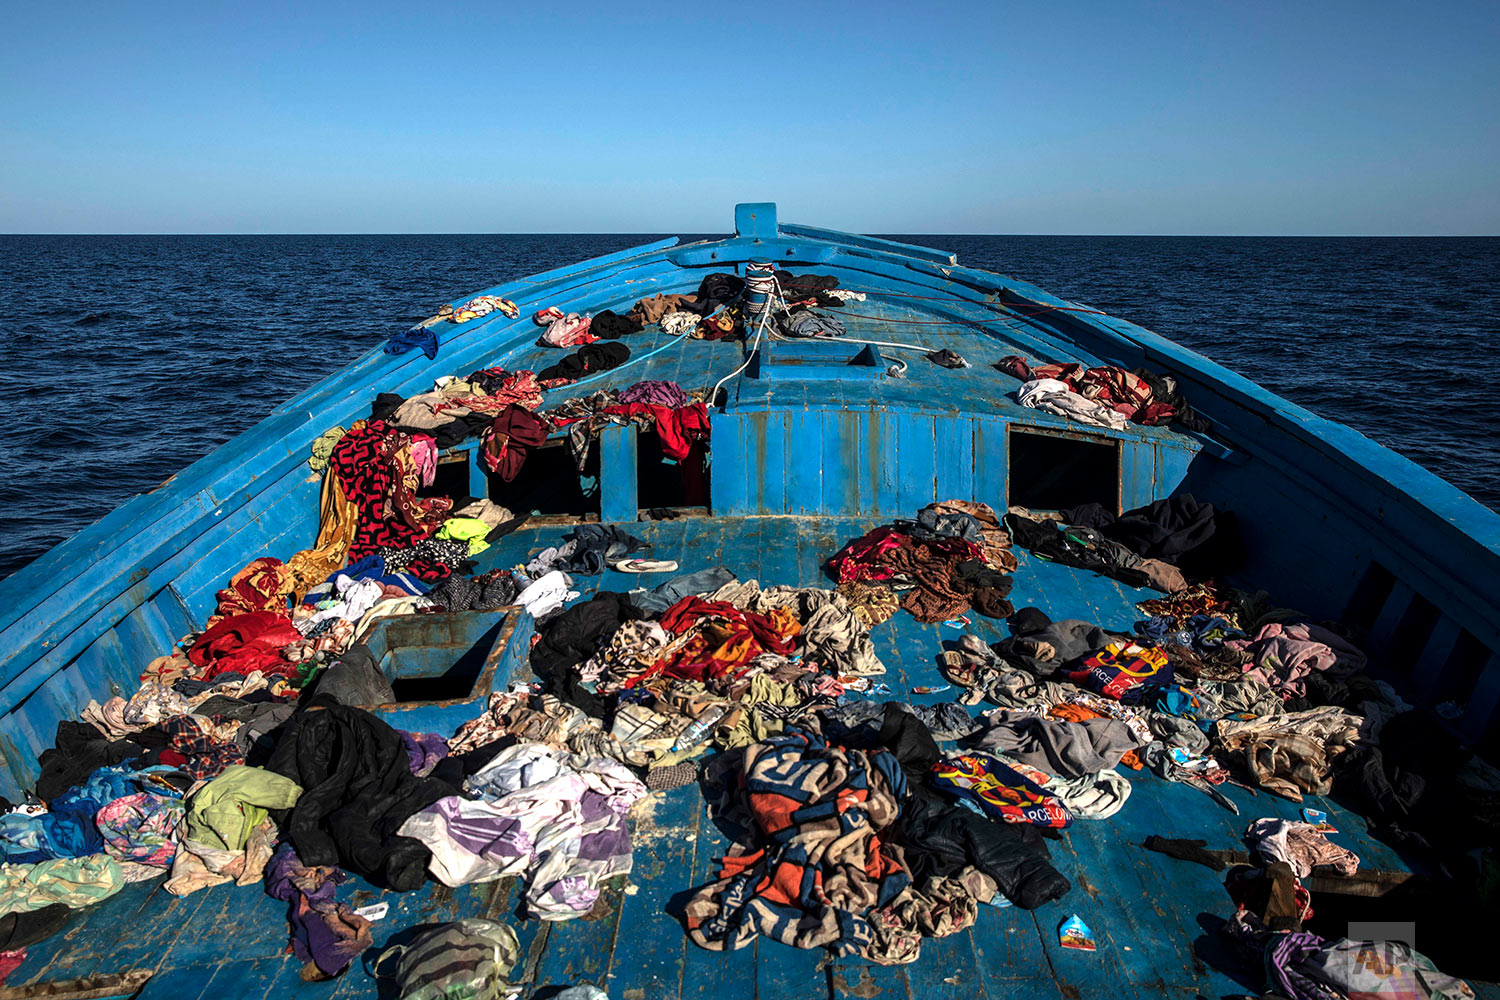  In this Tuesday, Jan. 16, 2018 photo, a wooden boat used by 450 refugees and migrants, mostly from Eritrea, remains abandoned off the Libyan coast after they were rescued by aid workers of the Spanish NGO Proactiva Open Arms, 34 miles north of Kasr-El-Karabulli, Libya. (AP Photo/Santi Palacios)&nbsp; |&nbsp; See these photos on AP Images  